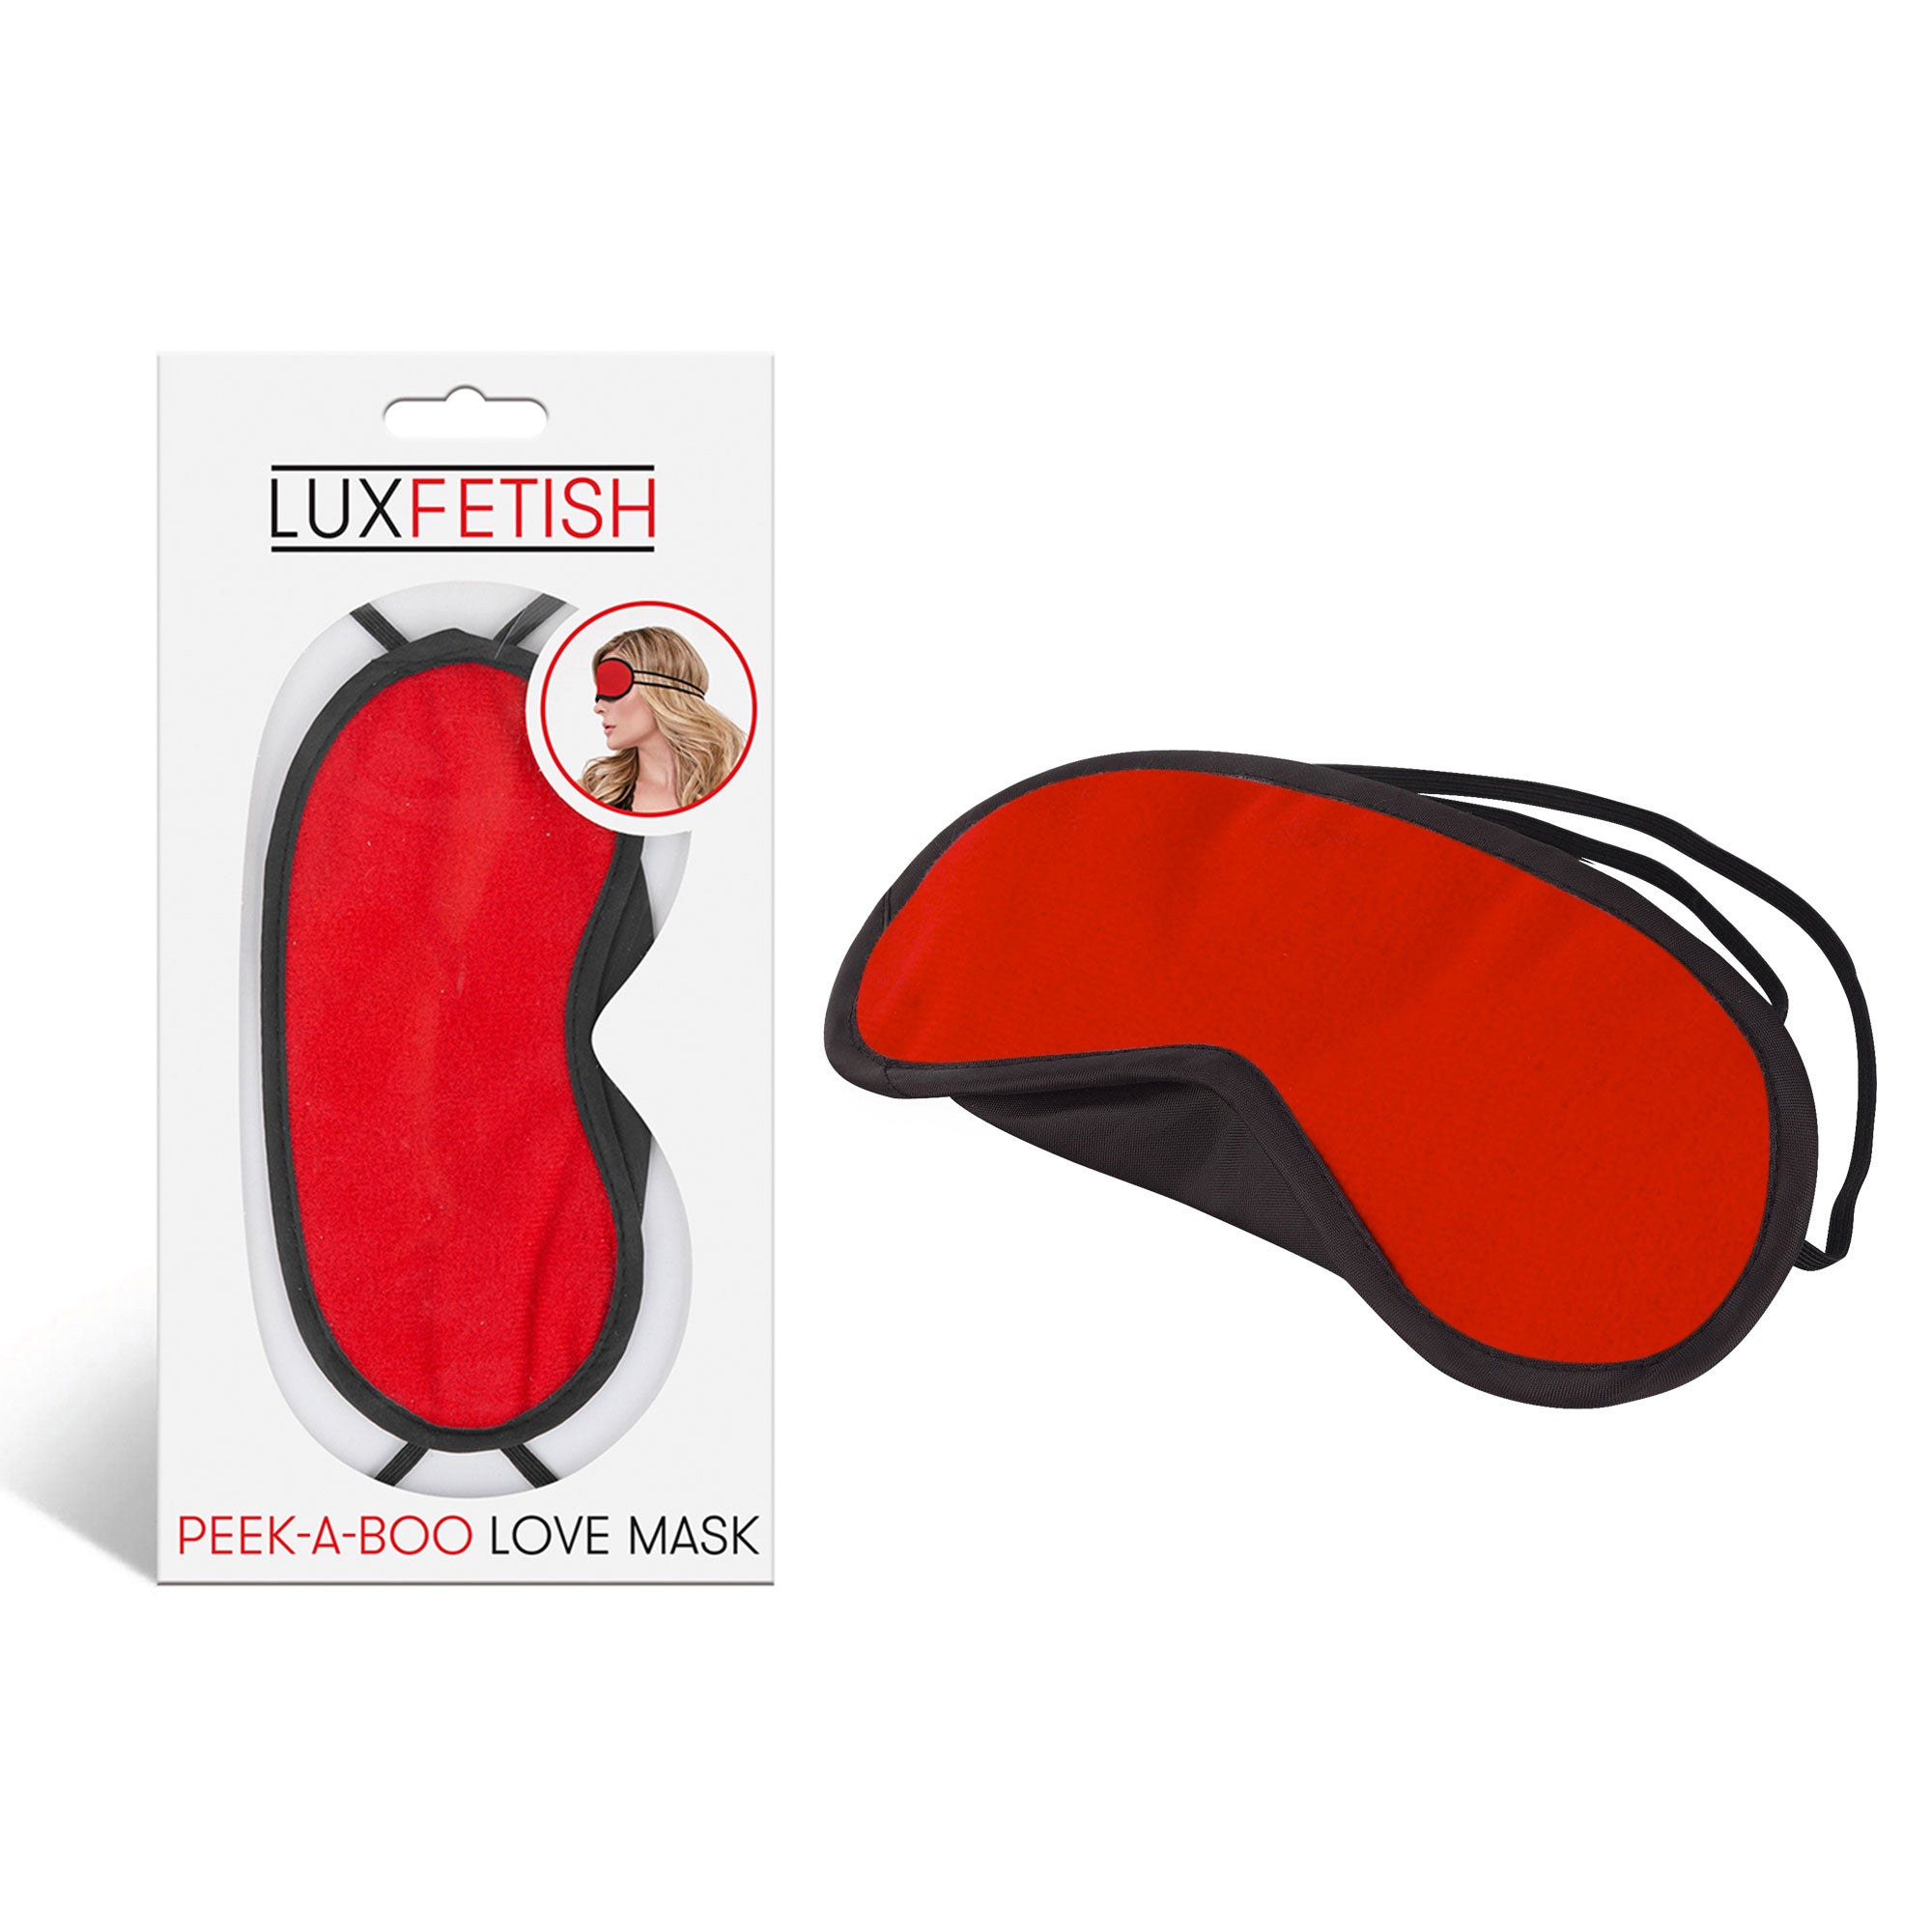 Packaging of Lux Fetish Peek-A-Boo Love Mask - Red at glastoy.com